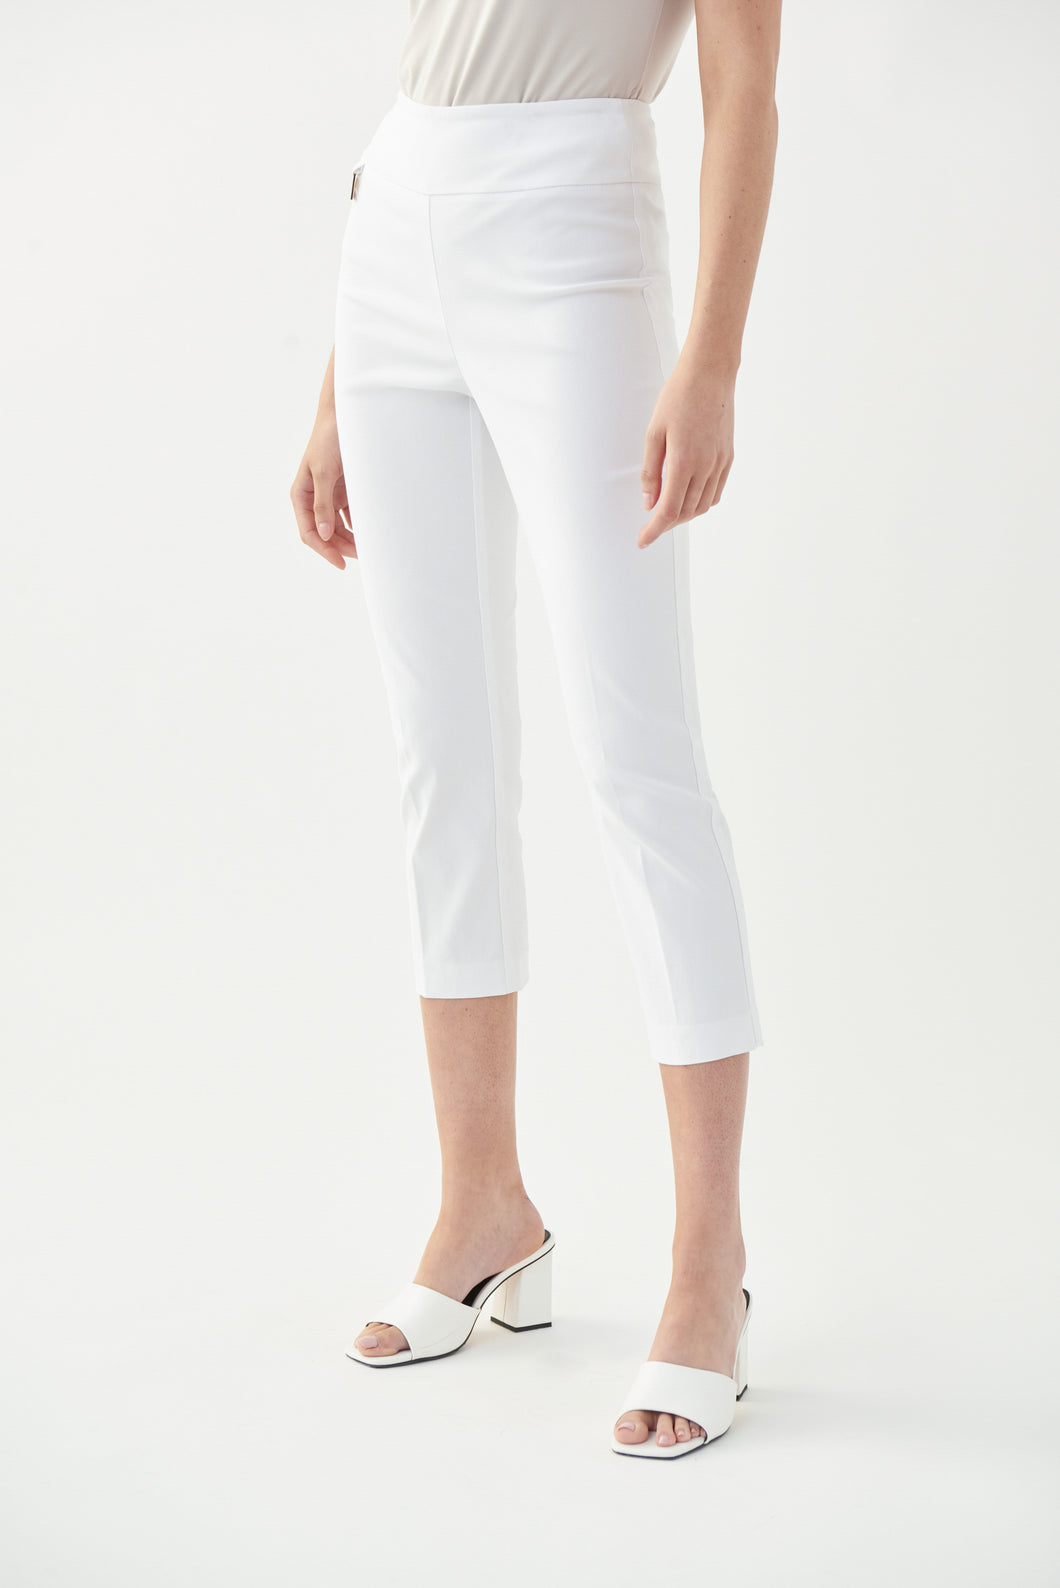 Cropped Woven Pants in White by Joseph Ribkoff (available in plus sizes)